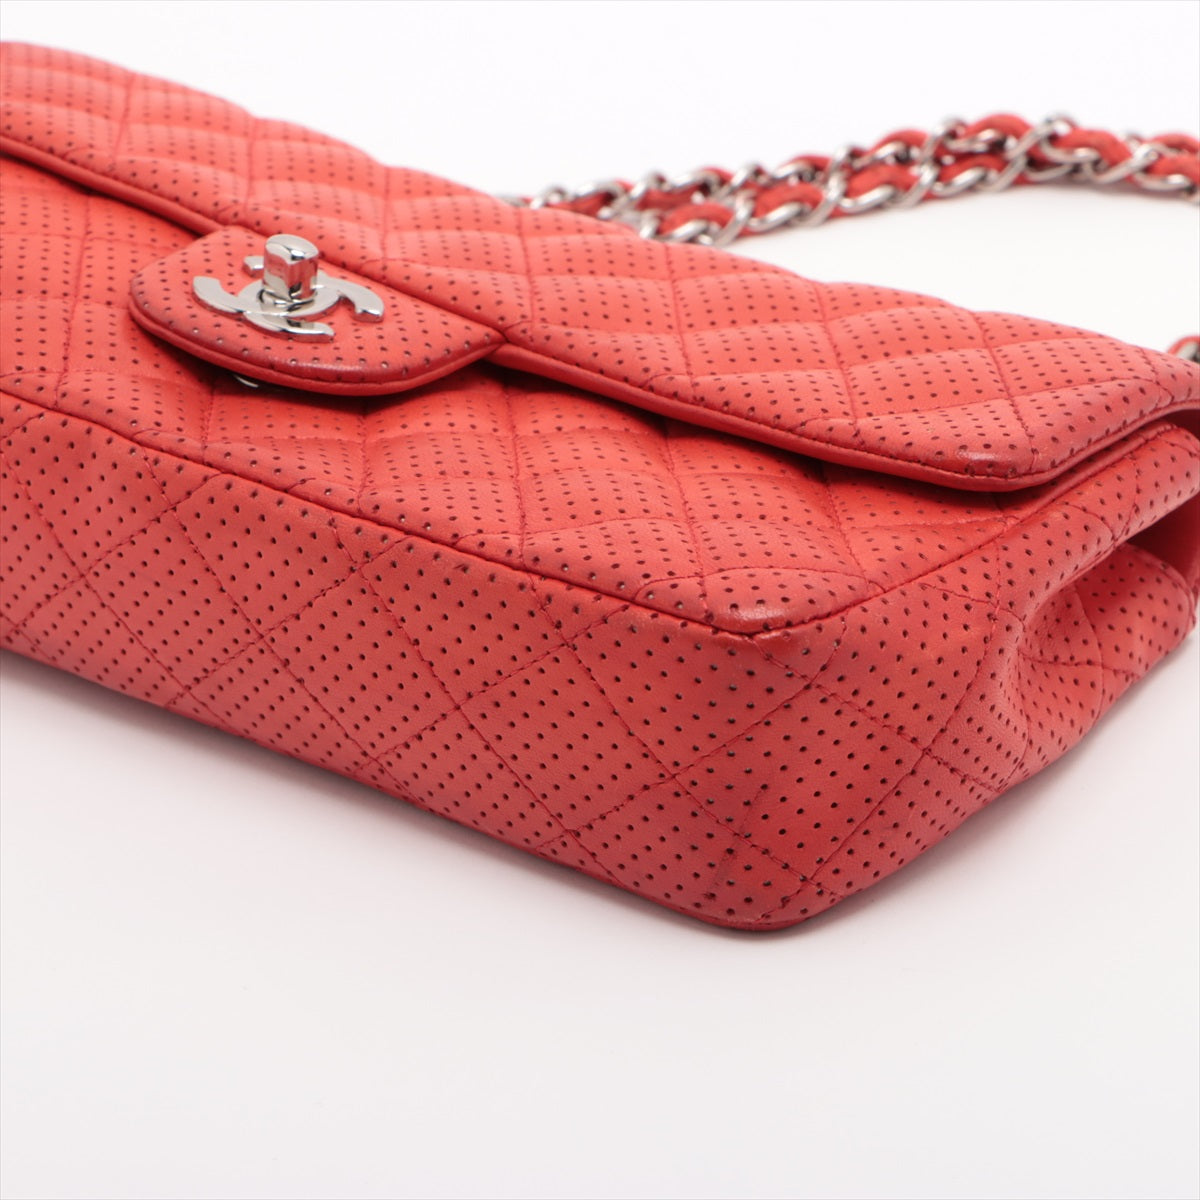 Chanel Matelasse Punching leather Single Flap Single Chain Bag Red Silver Metal Fittings 11XXXXXX